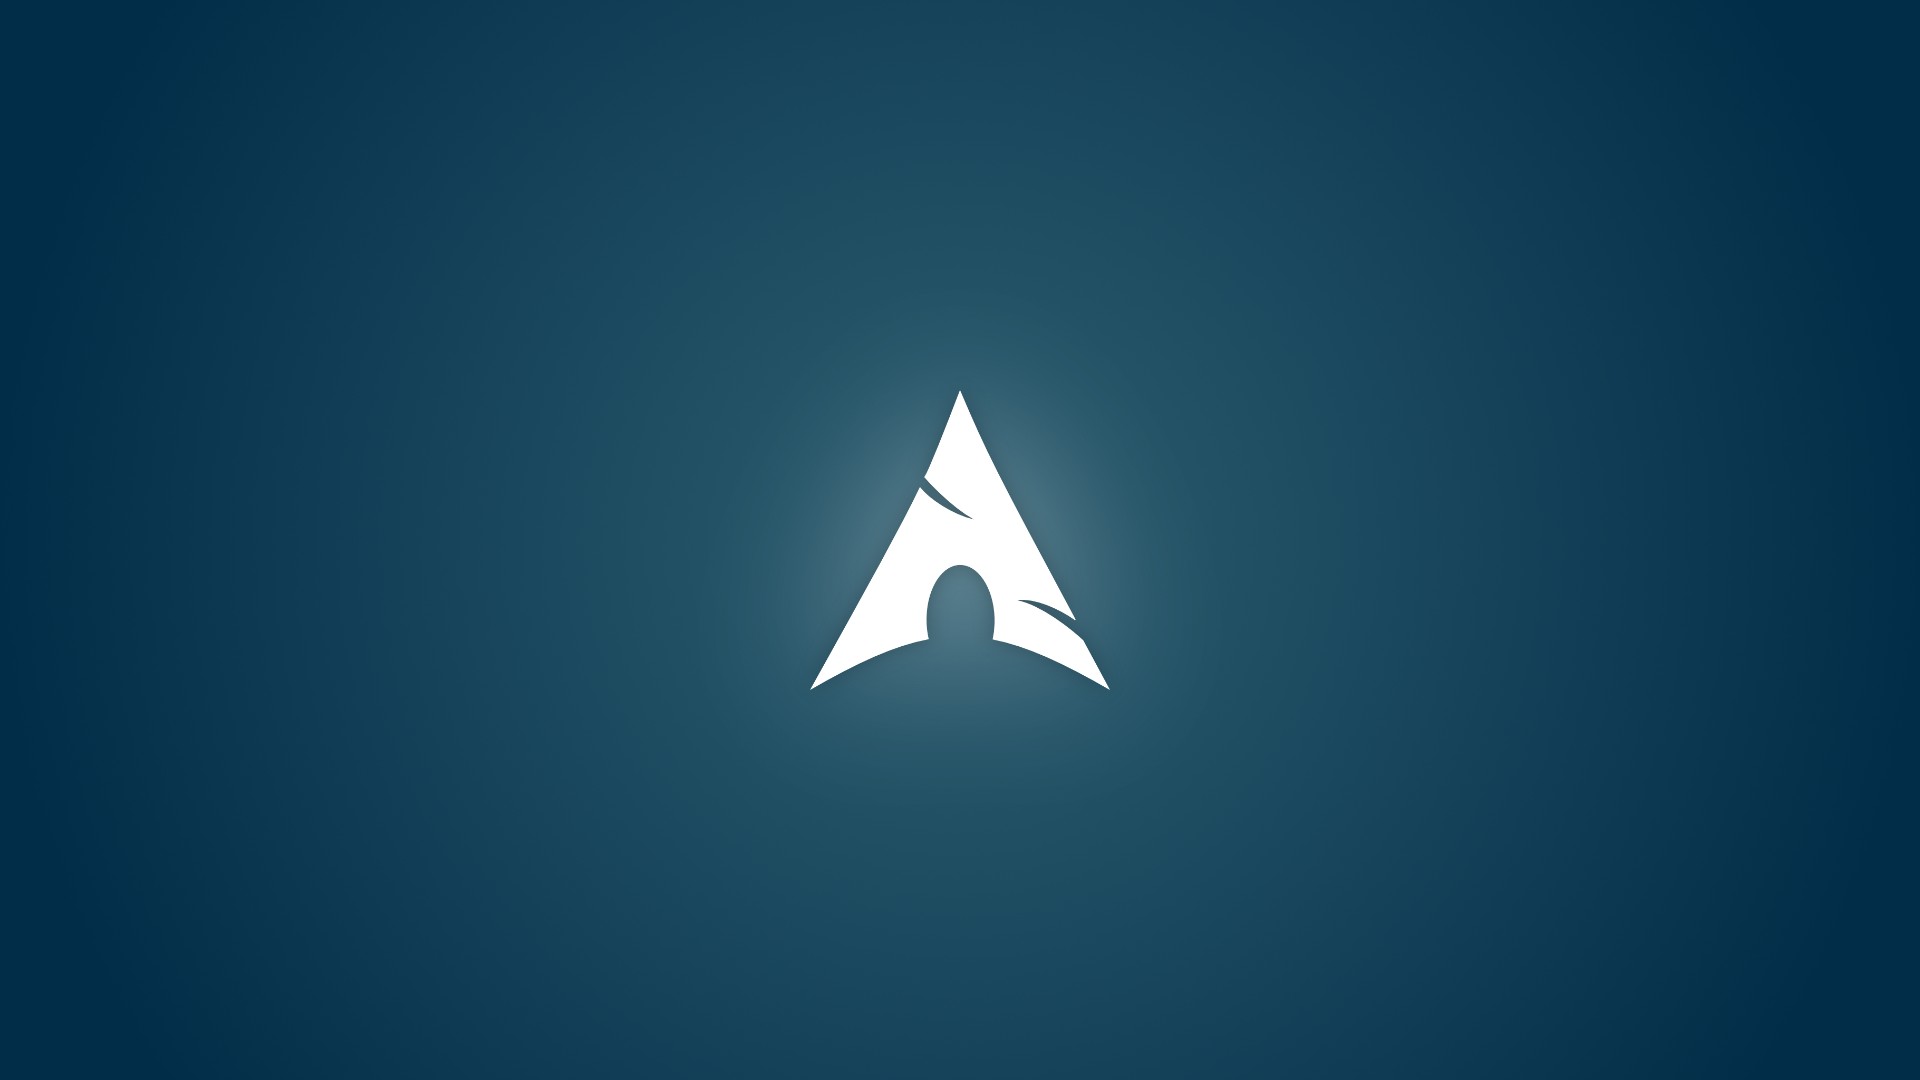 Arch Linux Linux Logo Wallpapers Hd Desktop And Mobile Backgrounds